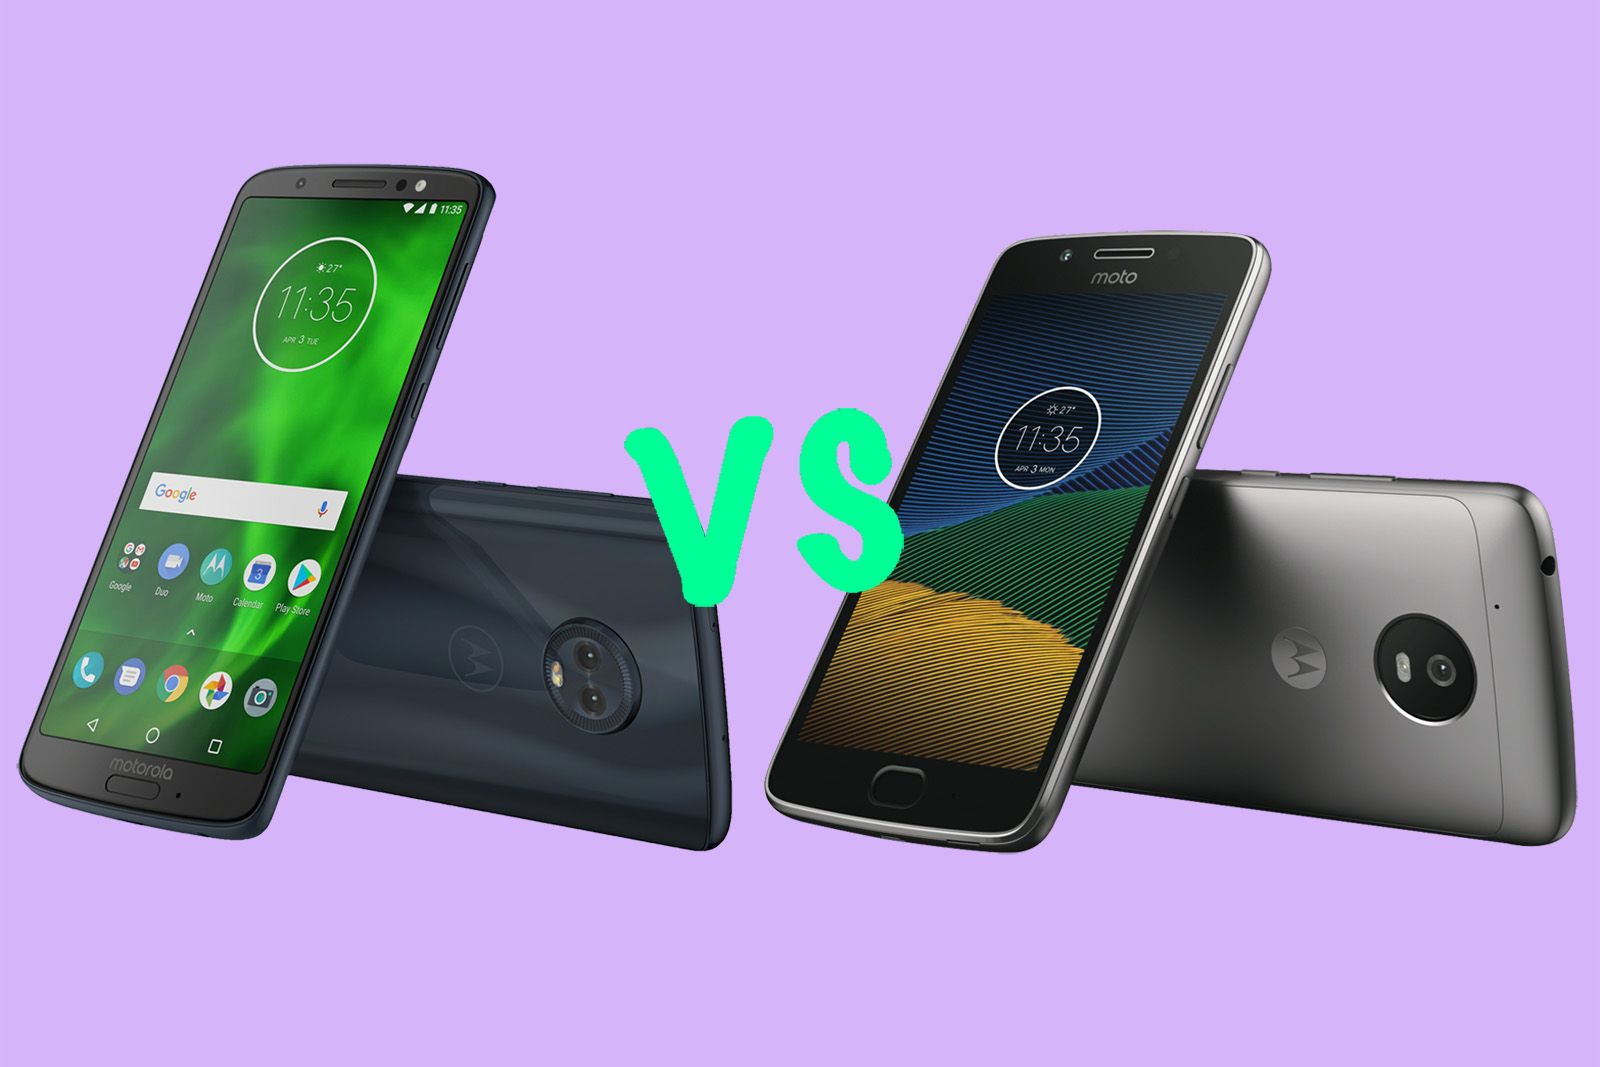 Moto G6 Vs Moto G5 Whats The Difference image 1